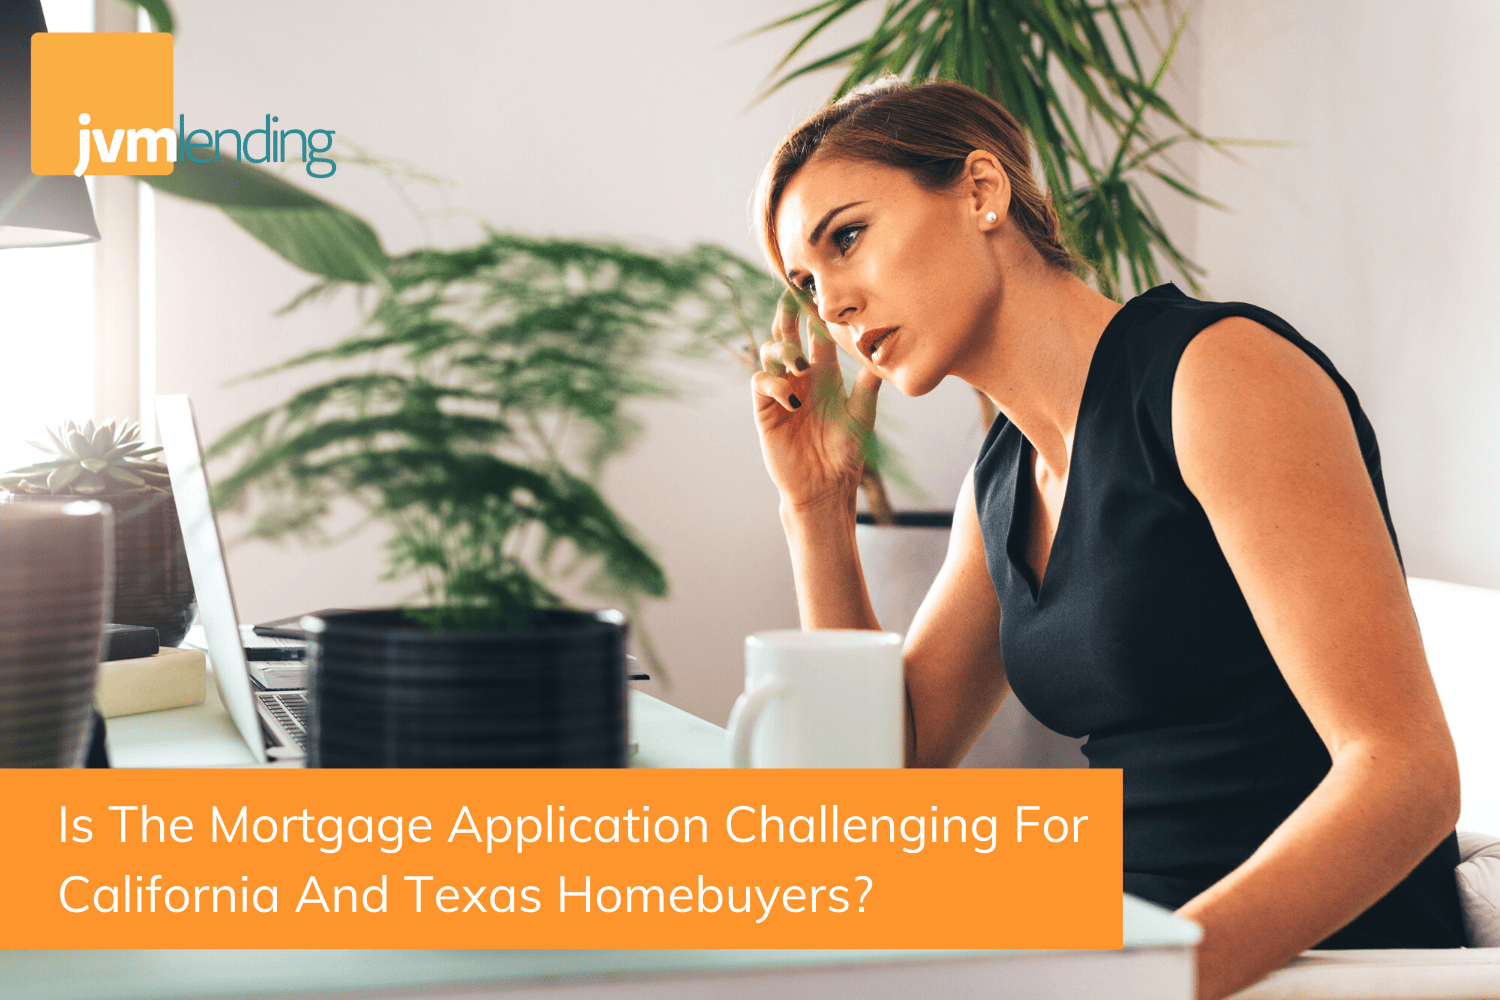 A woman works from home on her mortgage application and looks concerned as she faces these six common mortgage application challenges.